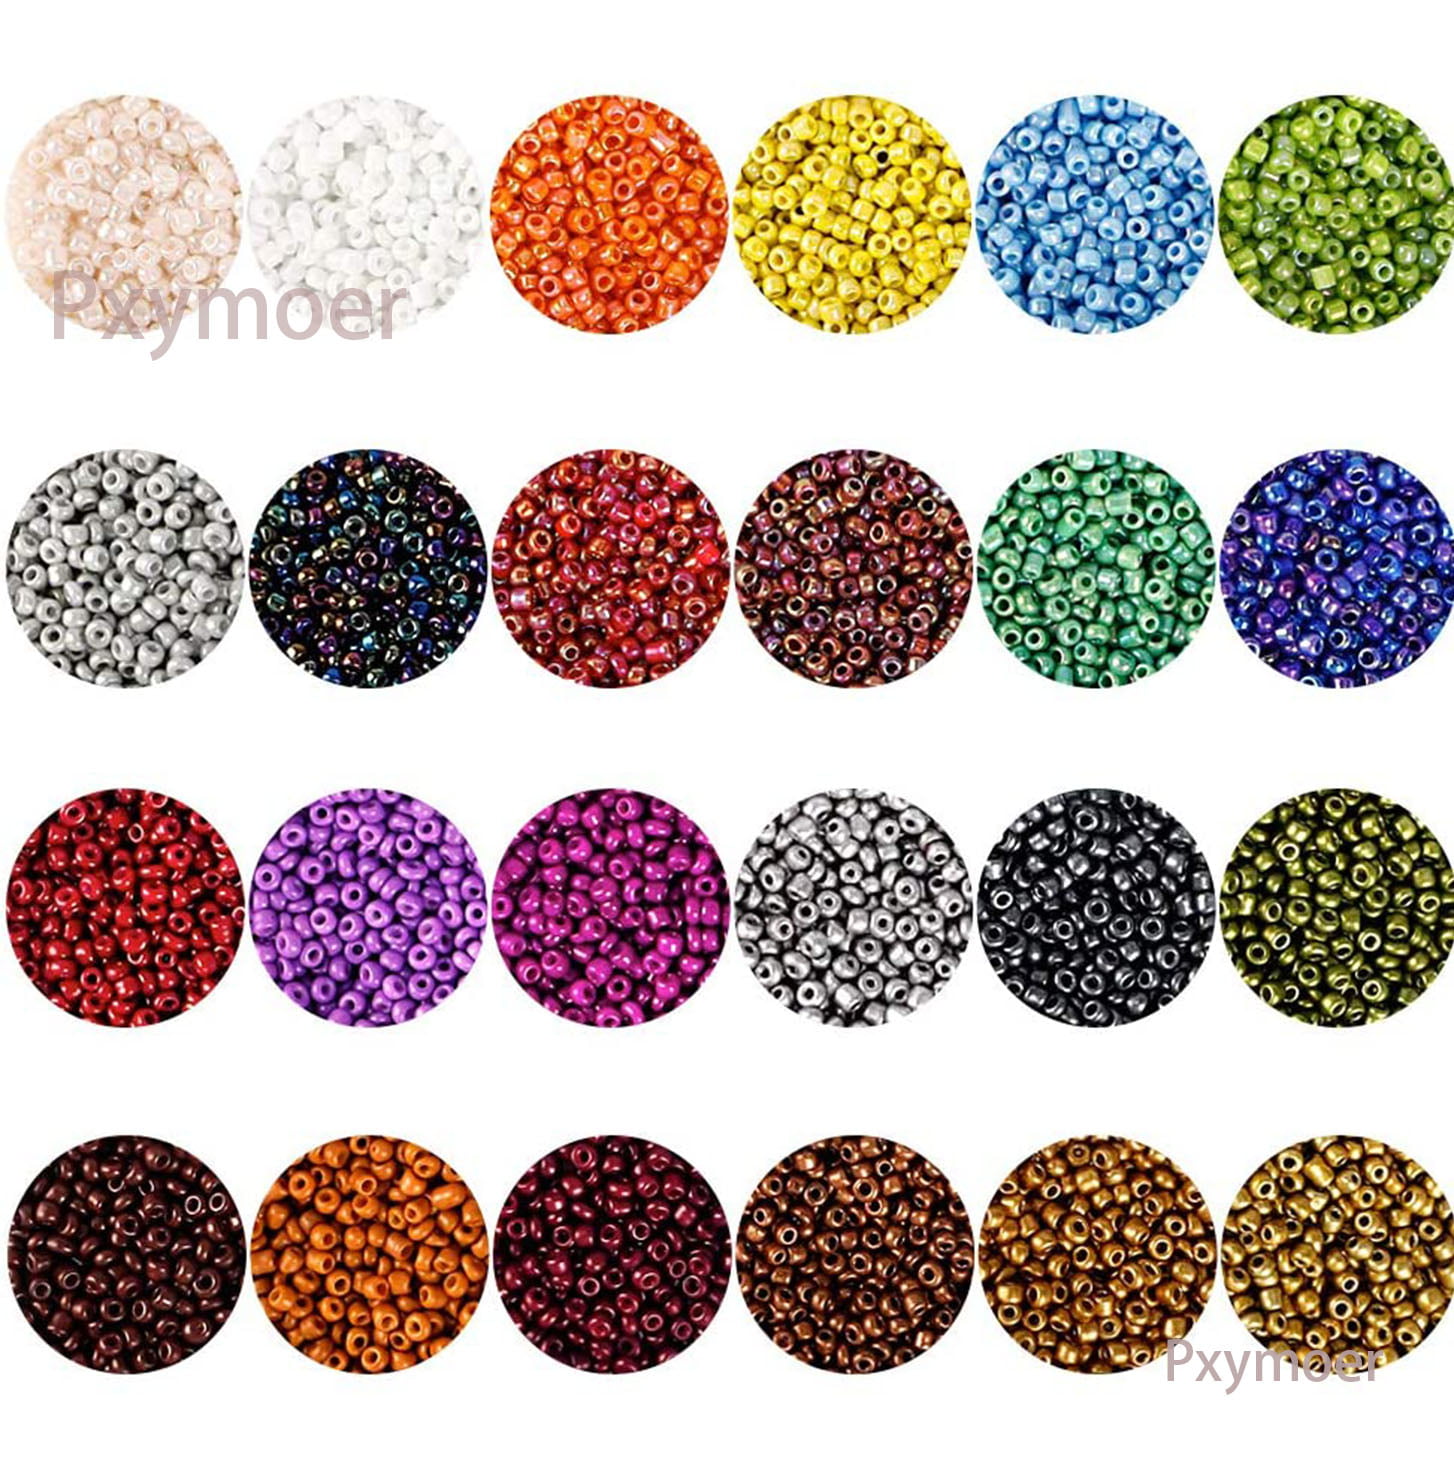 Kinearcharms Seed Beads ,30000pcs Seed Beads for Jewelry Making 2mm Glass Beads Craft Set Bracelets Necklace Ring Making Kits with 550pcs